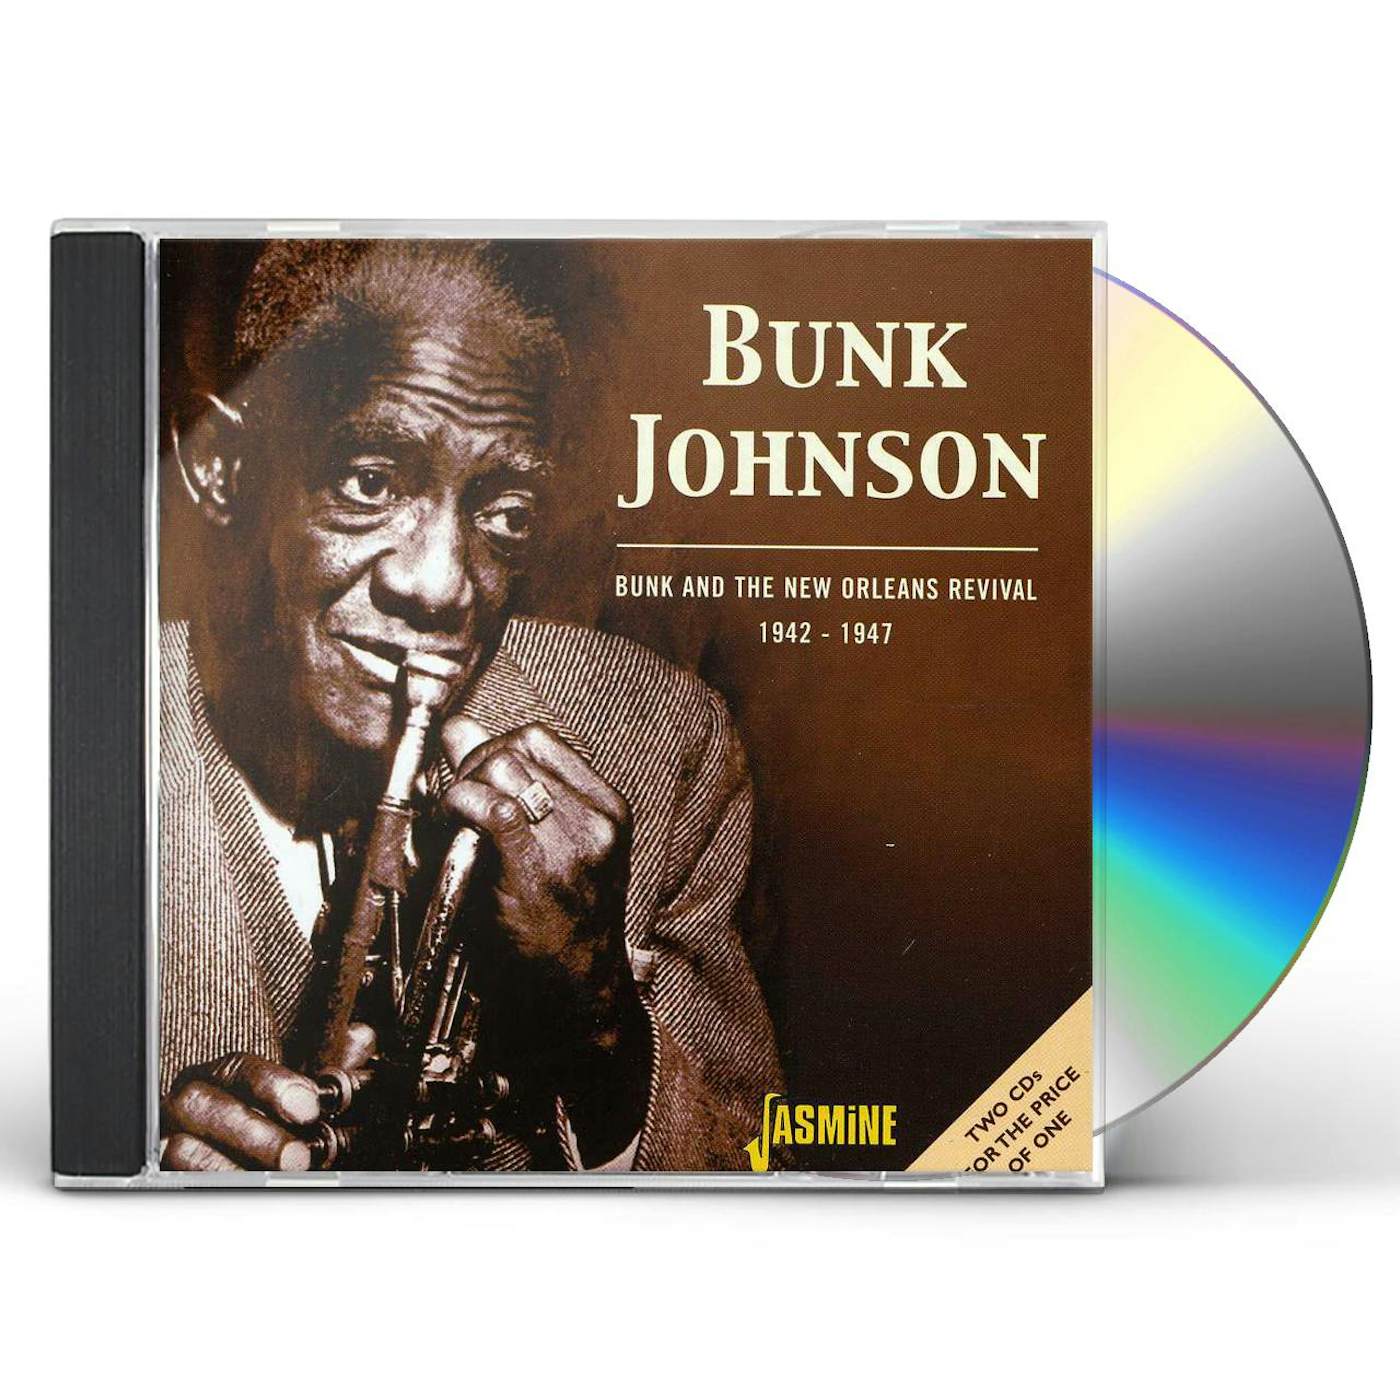 Bunk Johnson BUNK & THE NEW ORLEANS REVIVAL 1942-47 CD